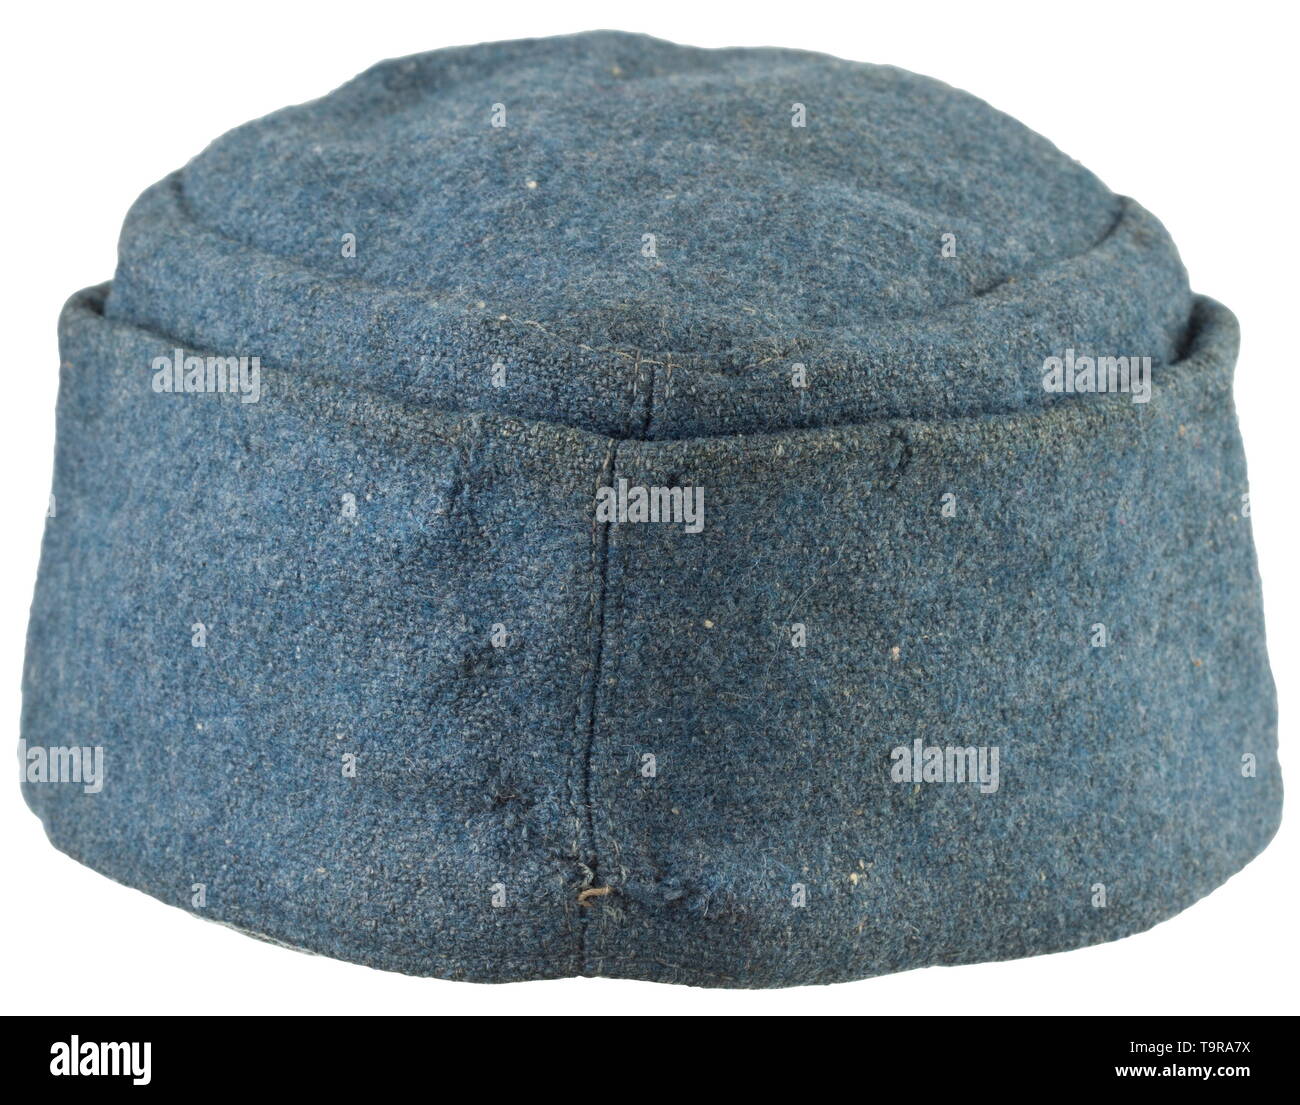 A field cap M 43 for members of Eastern Peoples and Cossack units depot piece from 1944 historic, historical, army, armies, armed forces, military, militaria, object, objects, stills, clipping, clippings, cut out, cut-out, cut-outs, 20th century, Editorial-Use-Only Stock Photo